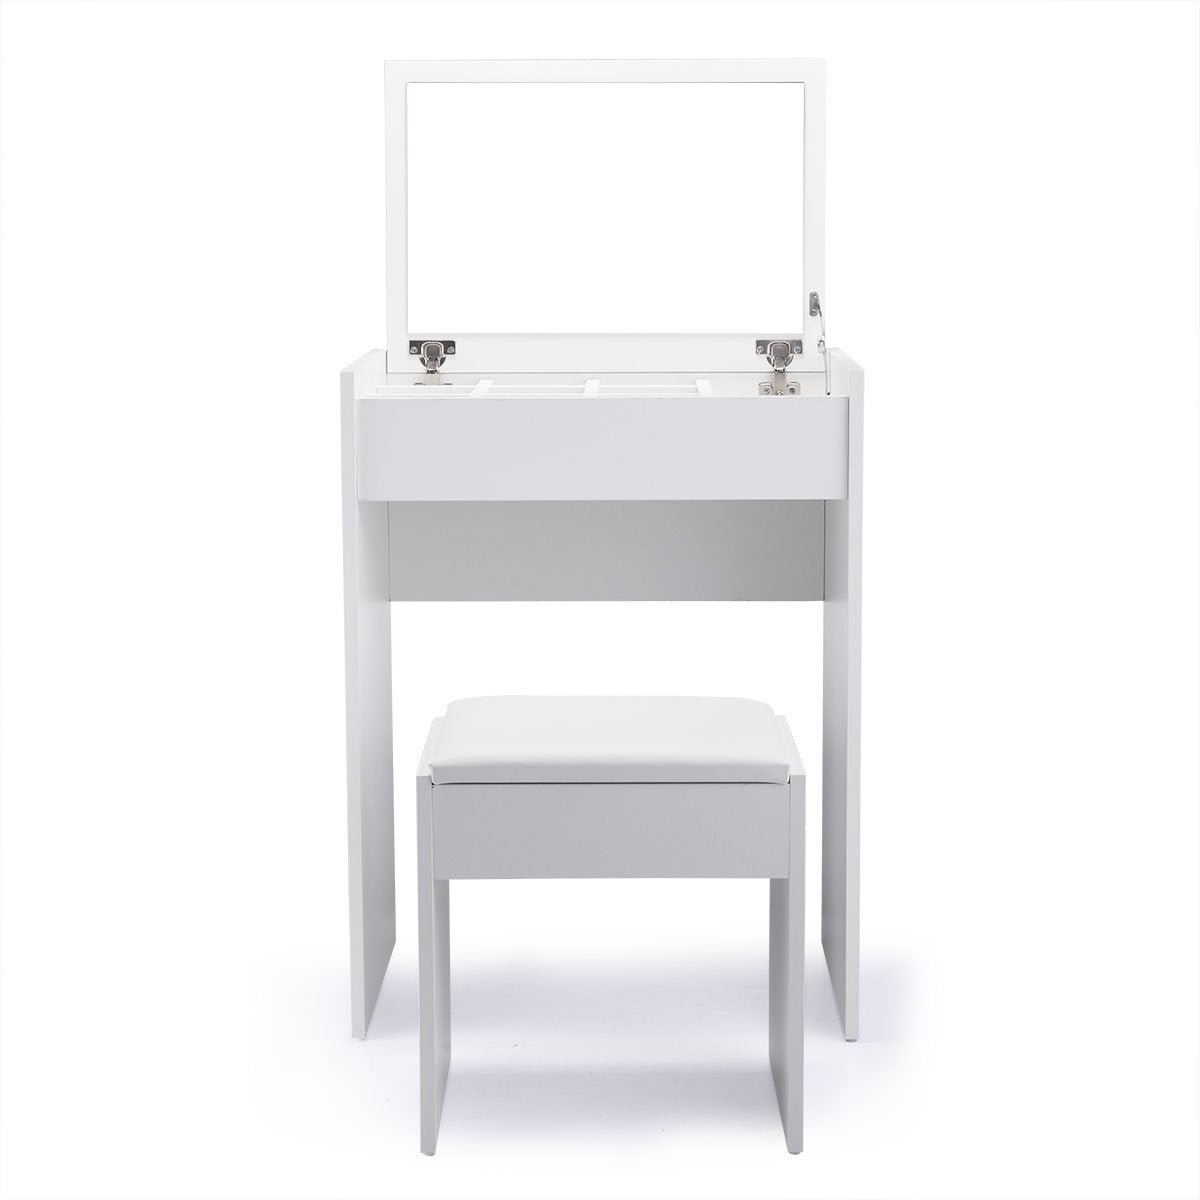 Vanity with Mirror, Storage and Stool